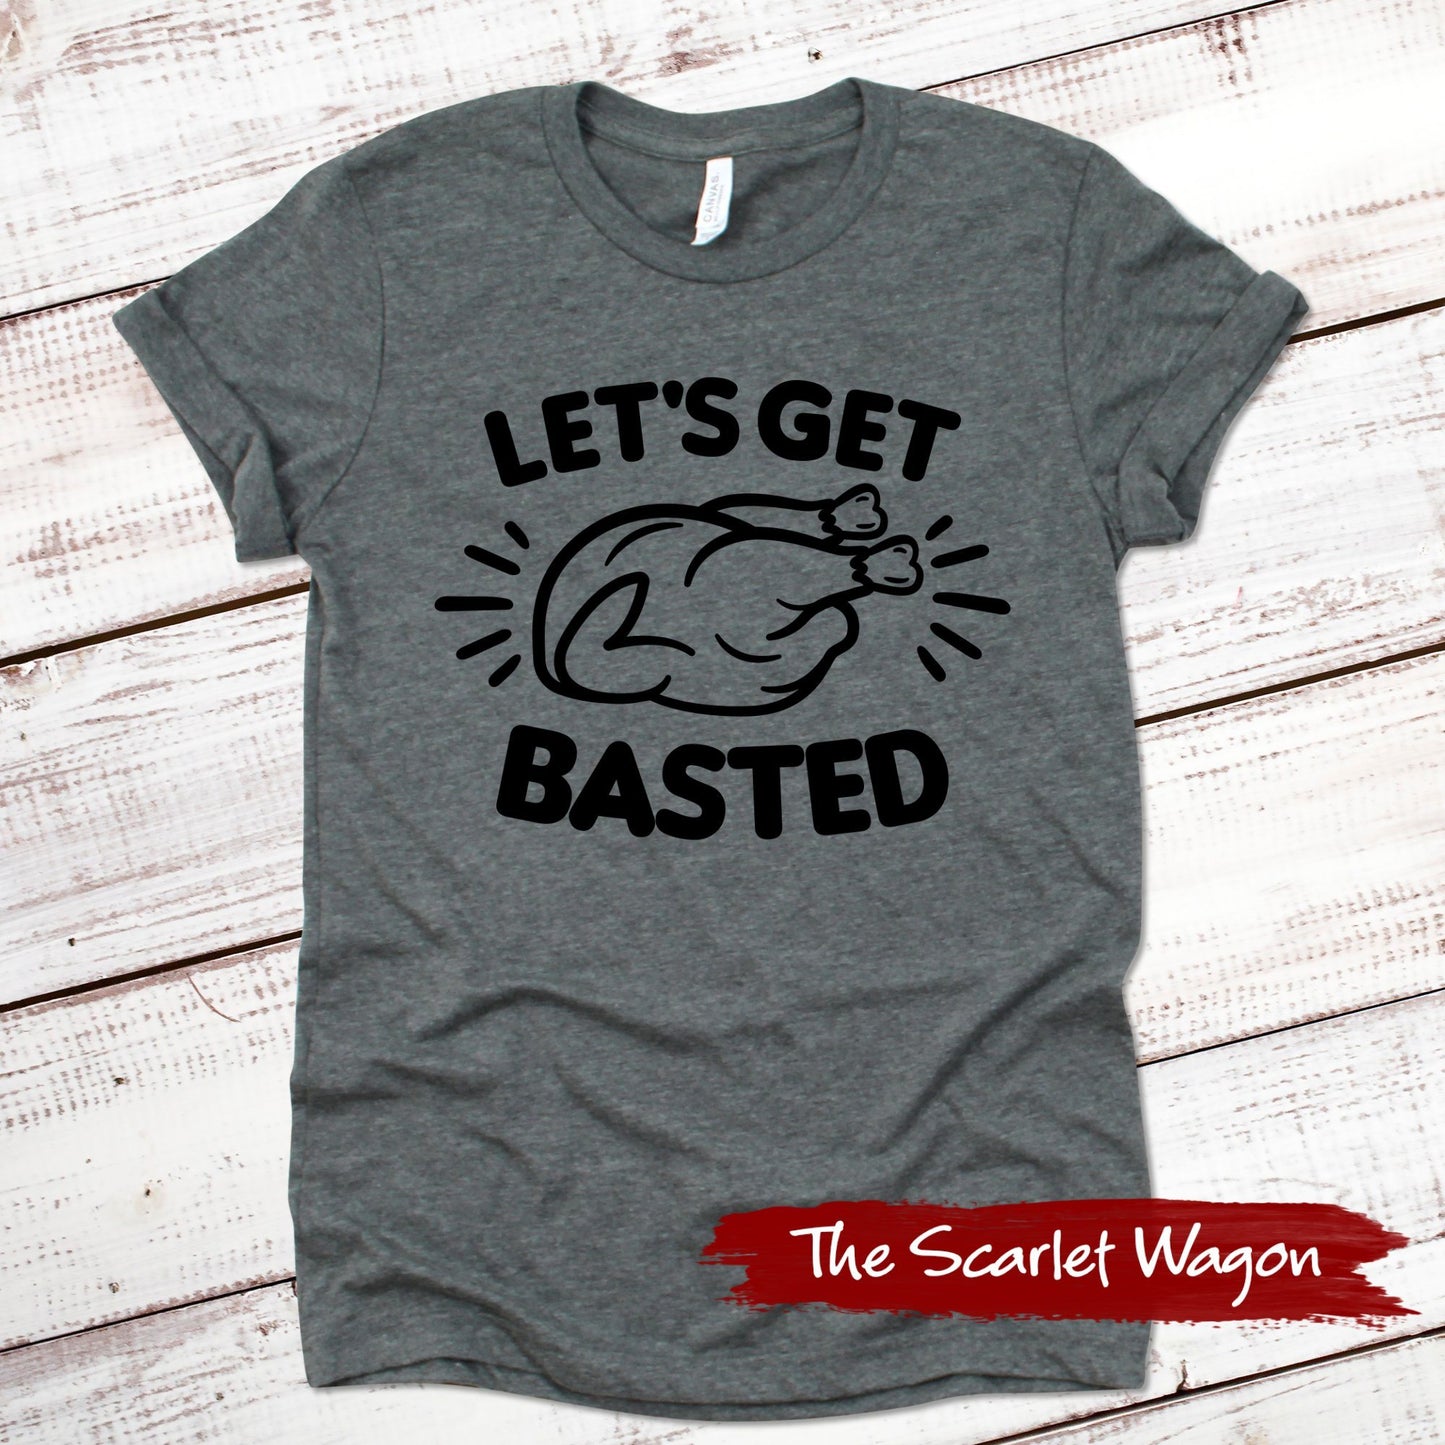 Let's Get Basted Thanksgiving Shirt Scarlet Wagon Deep Heather Gray XS 